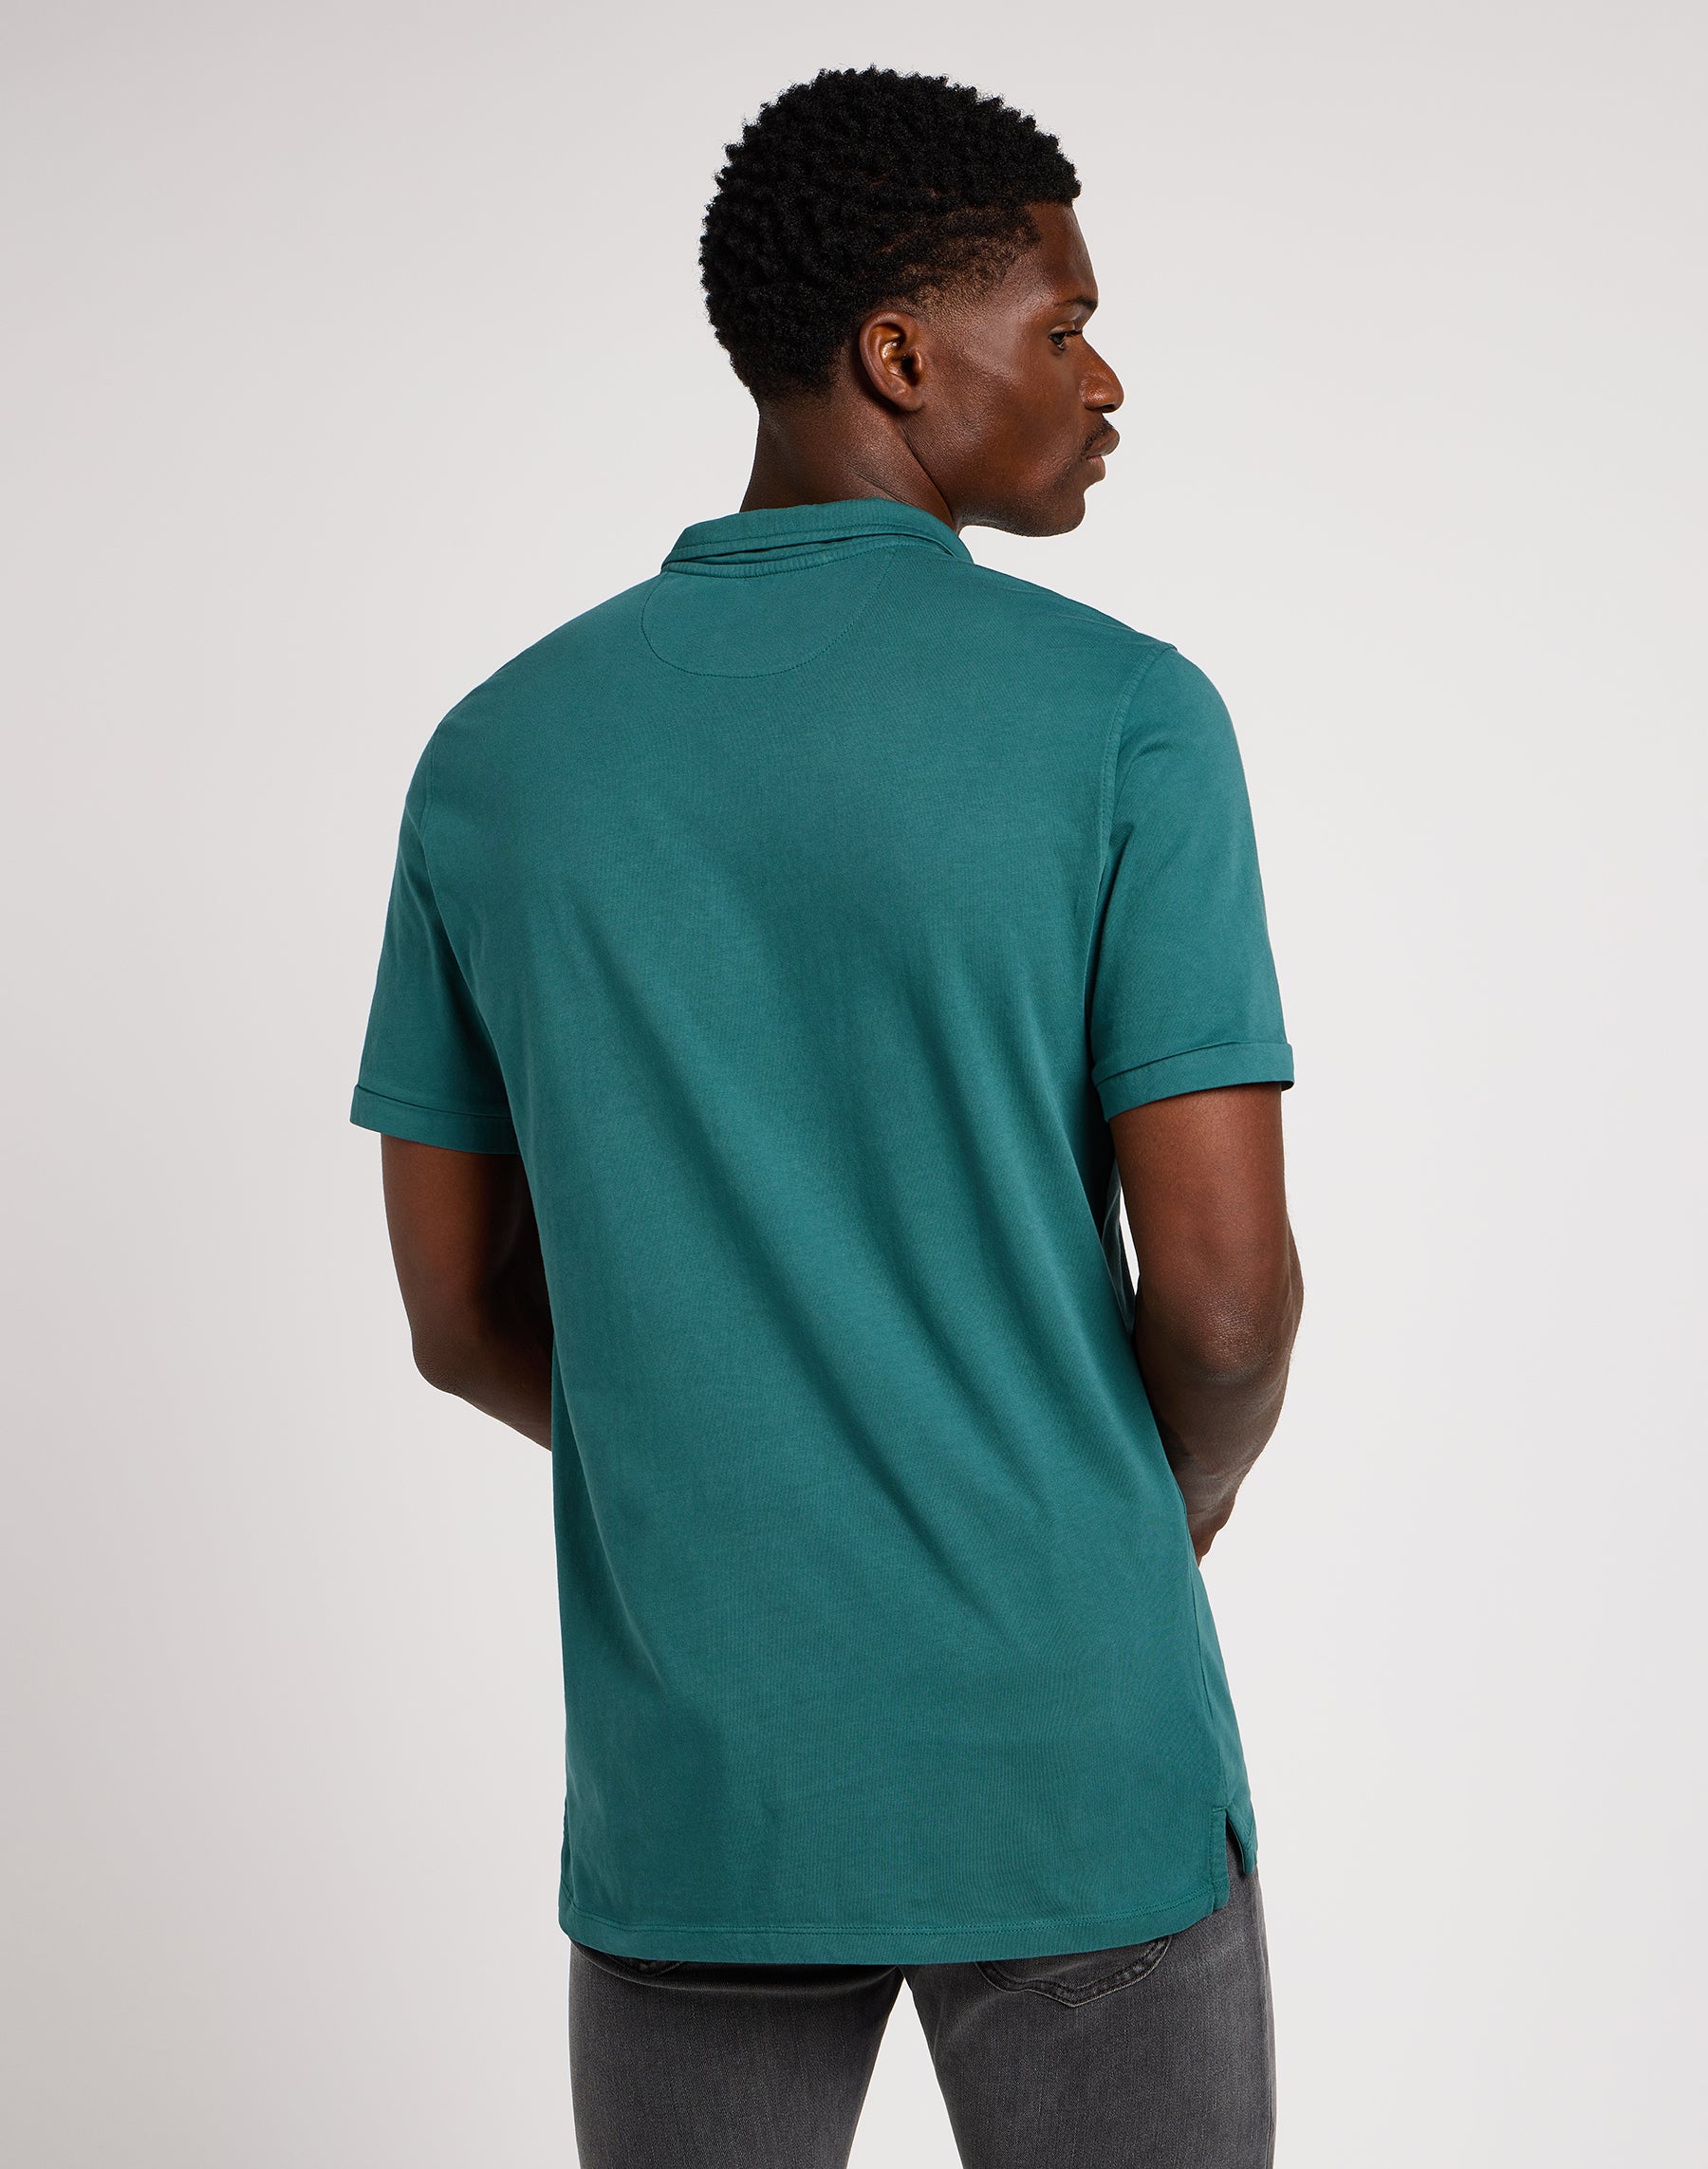 Jersey Polo in Evergreen Polos Lee   